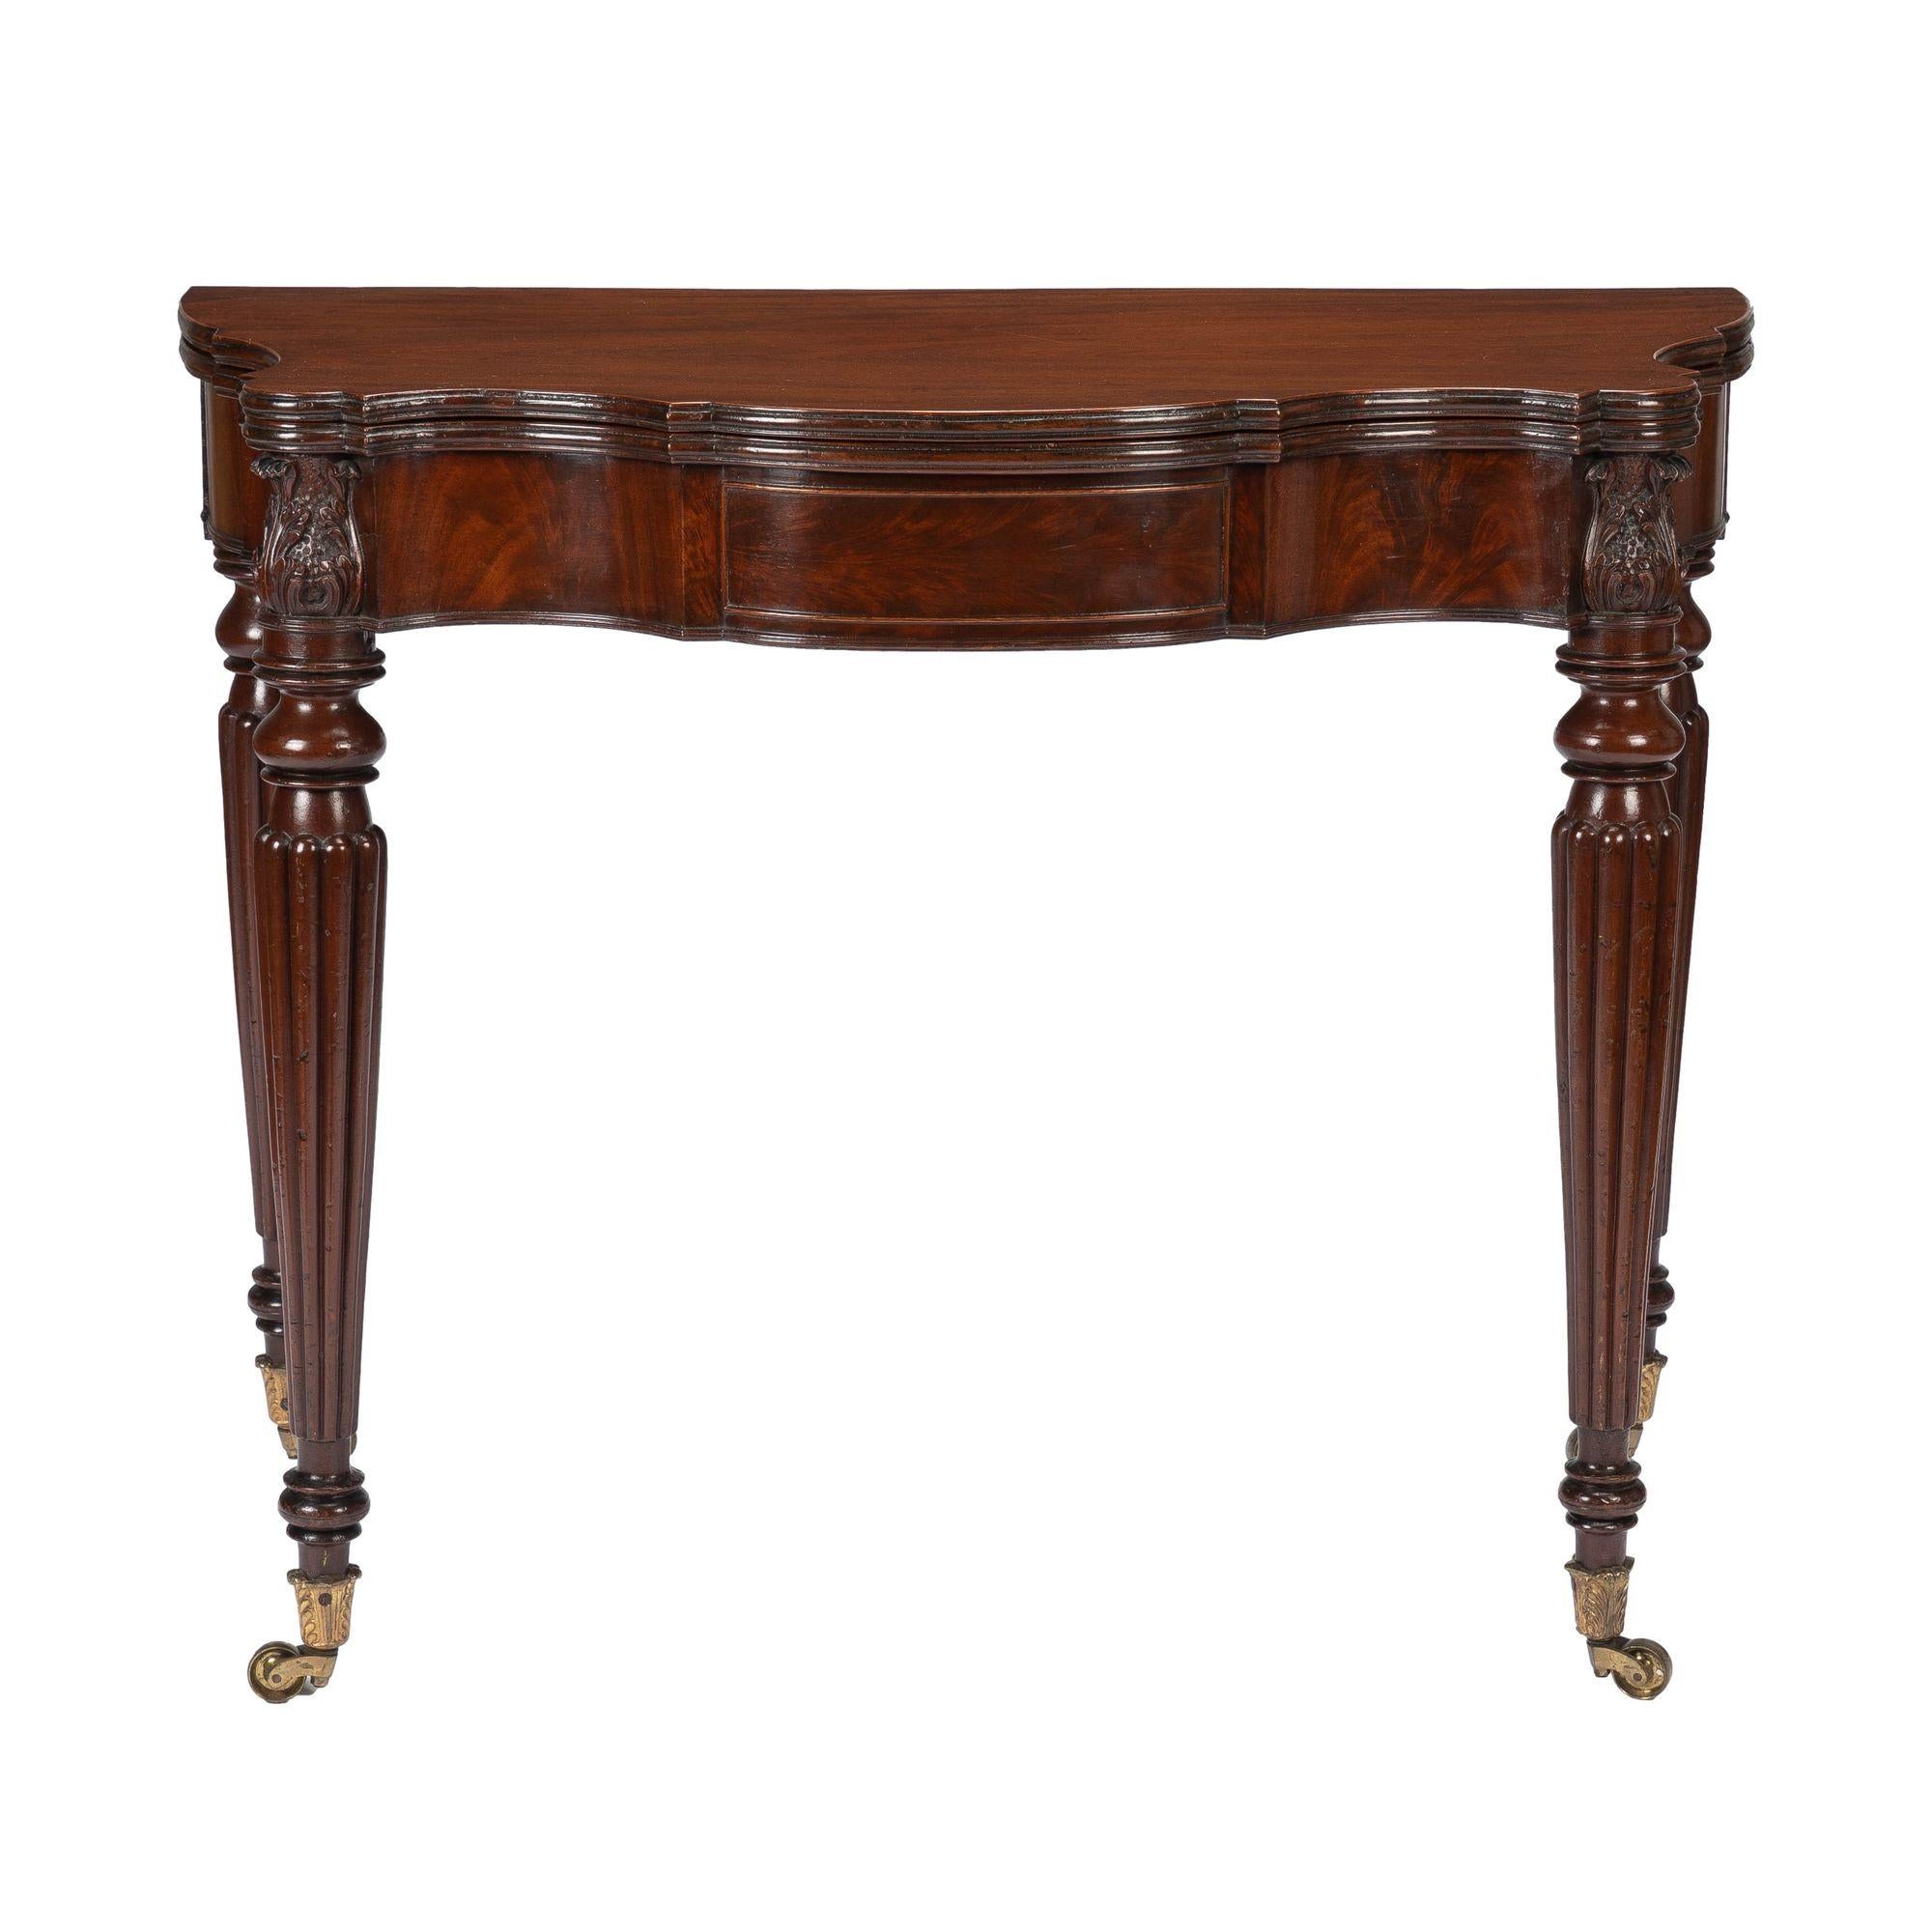 American serpentine, bull nosed, flip top mahogany game table with ovolo cut corners on turreted leg dies. Attributed to Samuel Field MacIntire, Salem, Massachusetts. The table has a conforming apron of matched figured mahogany veneers framed by